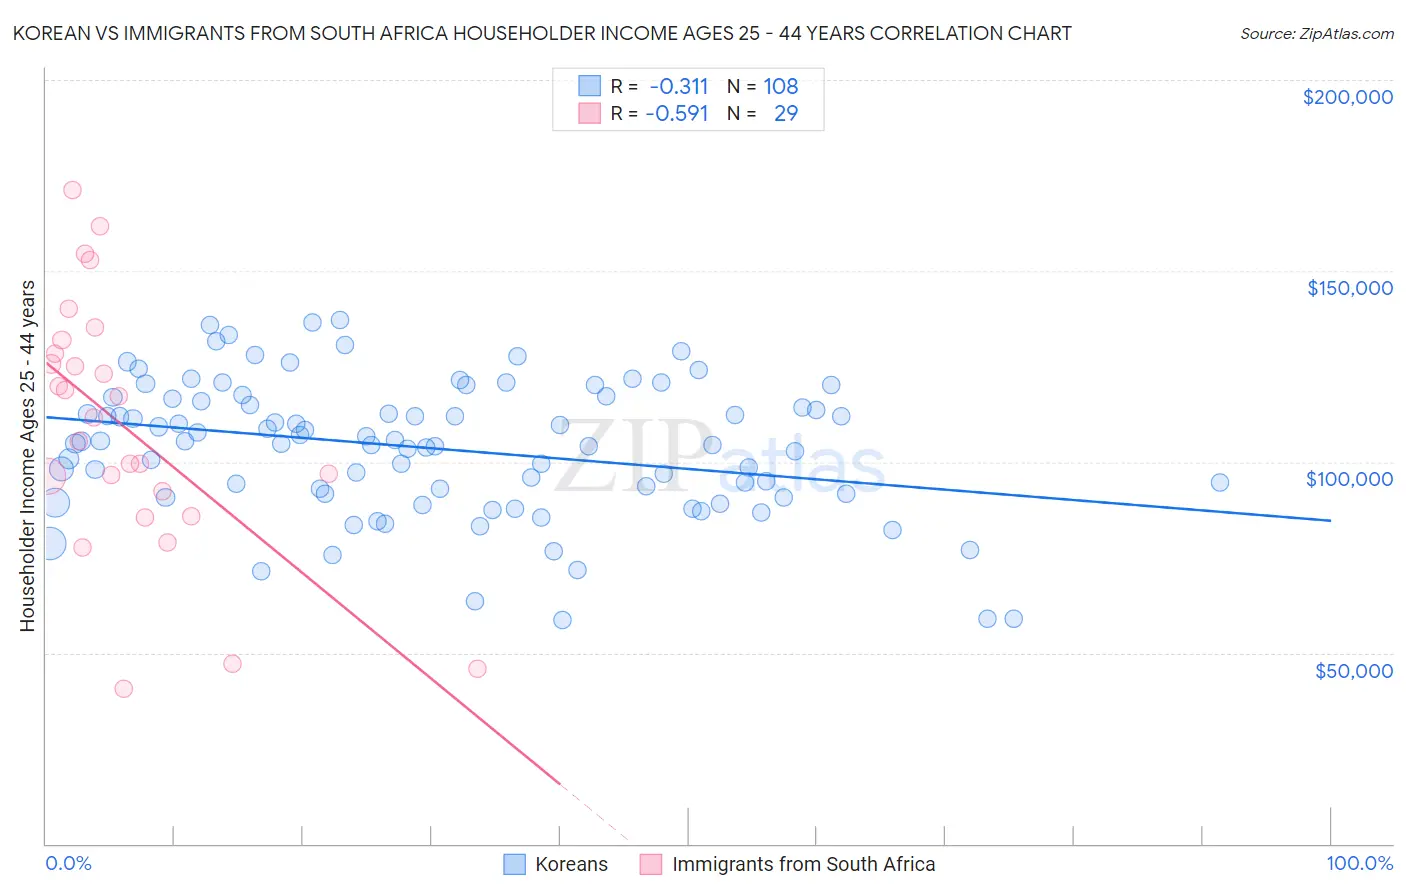 Korean vs Immigrants from South Africa Householder Income Ages 25 - 44 years